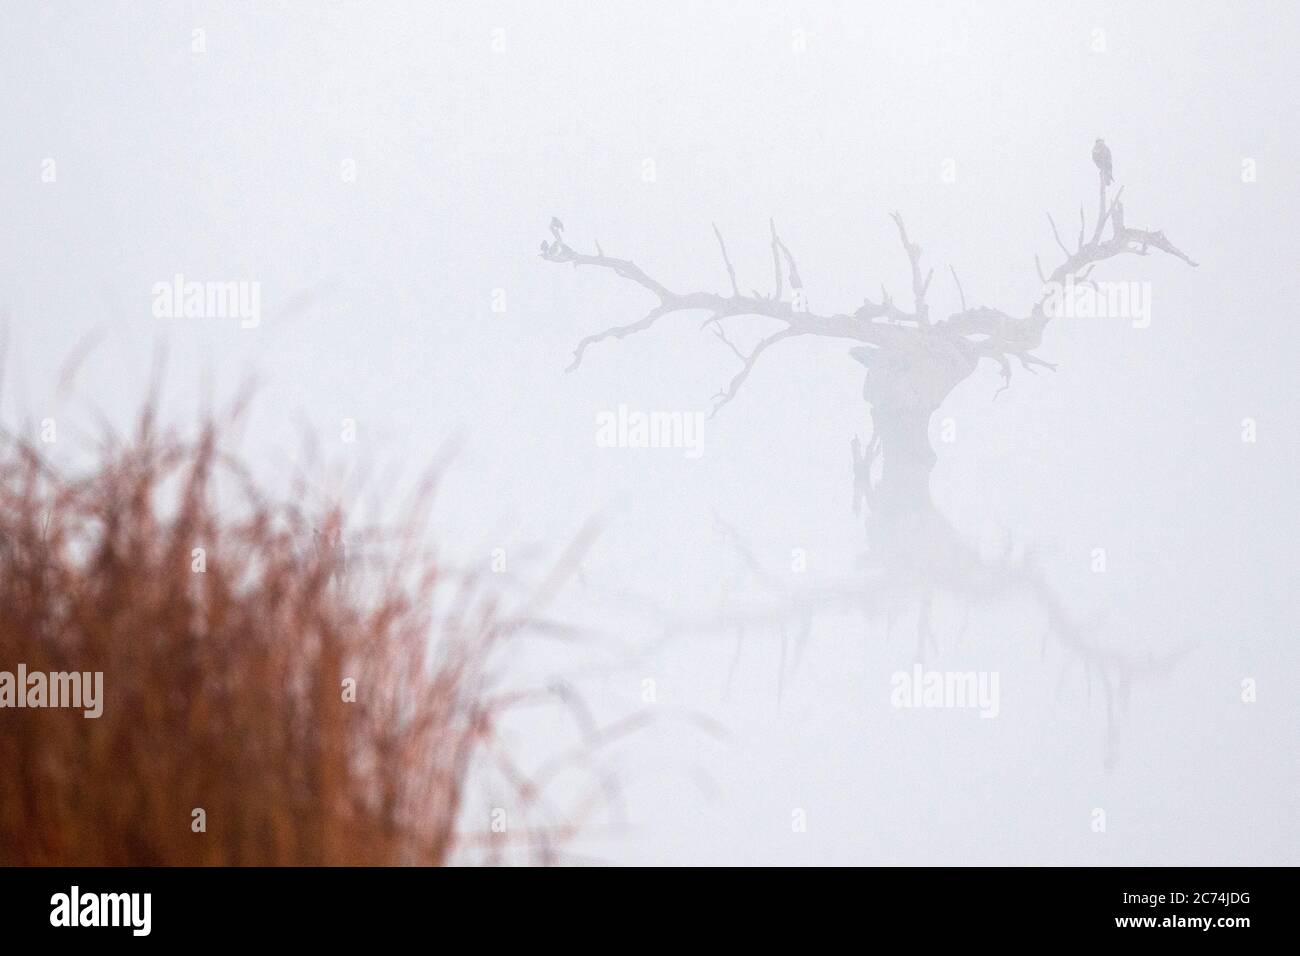 Western Marsh Harrier (Circus aeruginosus), perched in a barren tree standing in the water during heavy mist, Spain, Extremadura Stock Photo